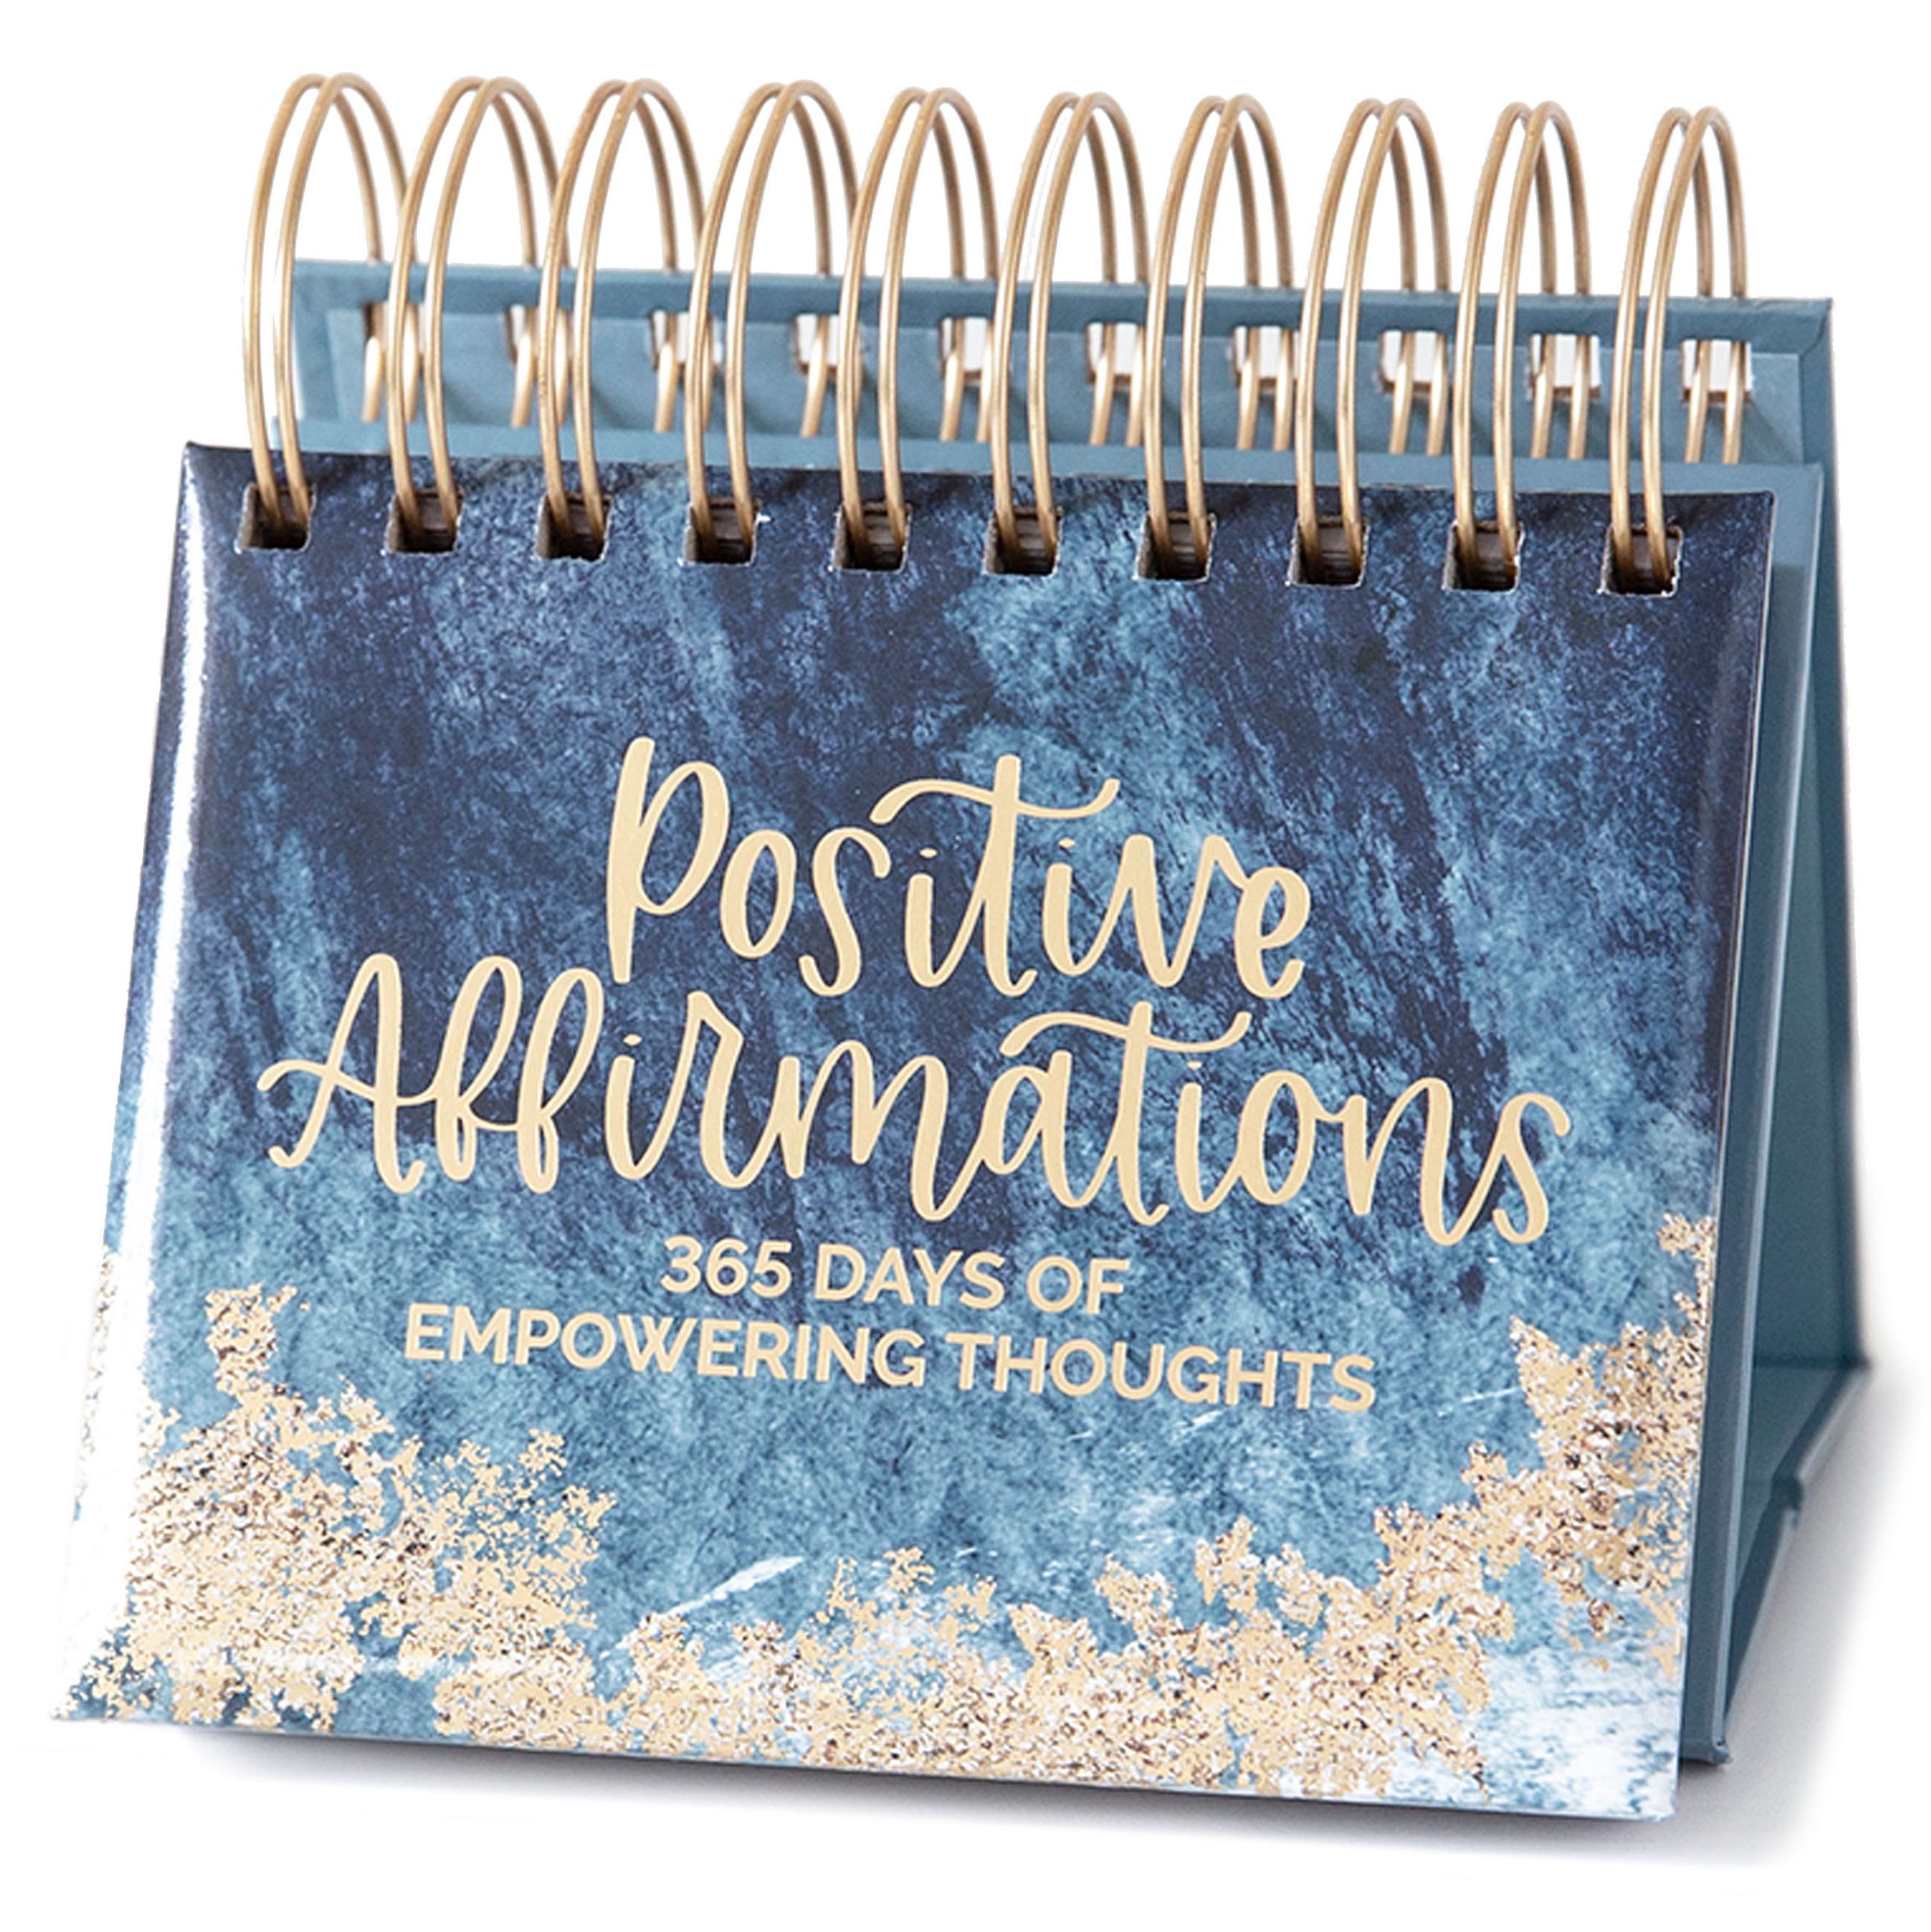 10 Positive Affirmation Gift Ideas to Uplift & Inspire